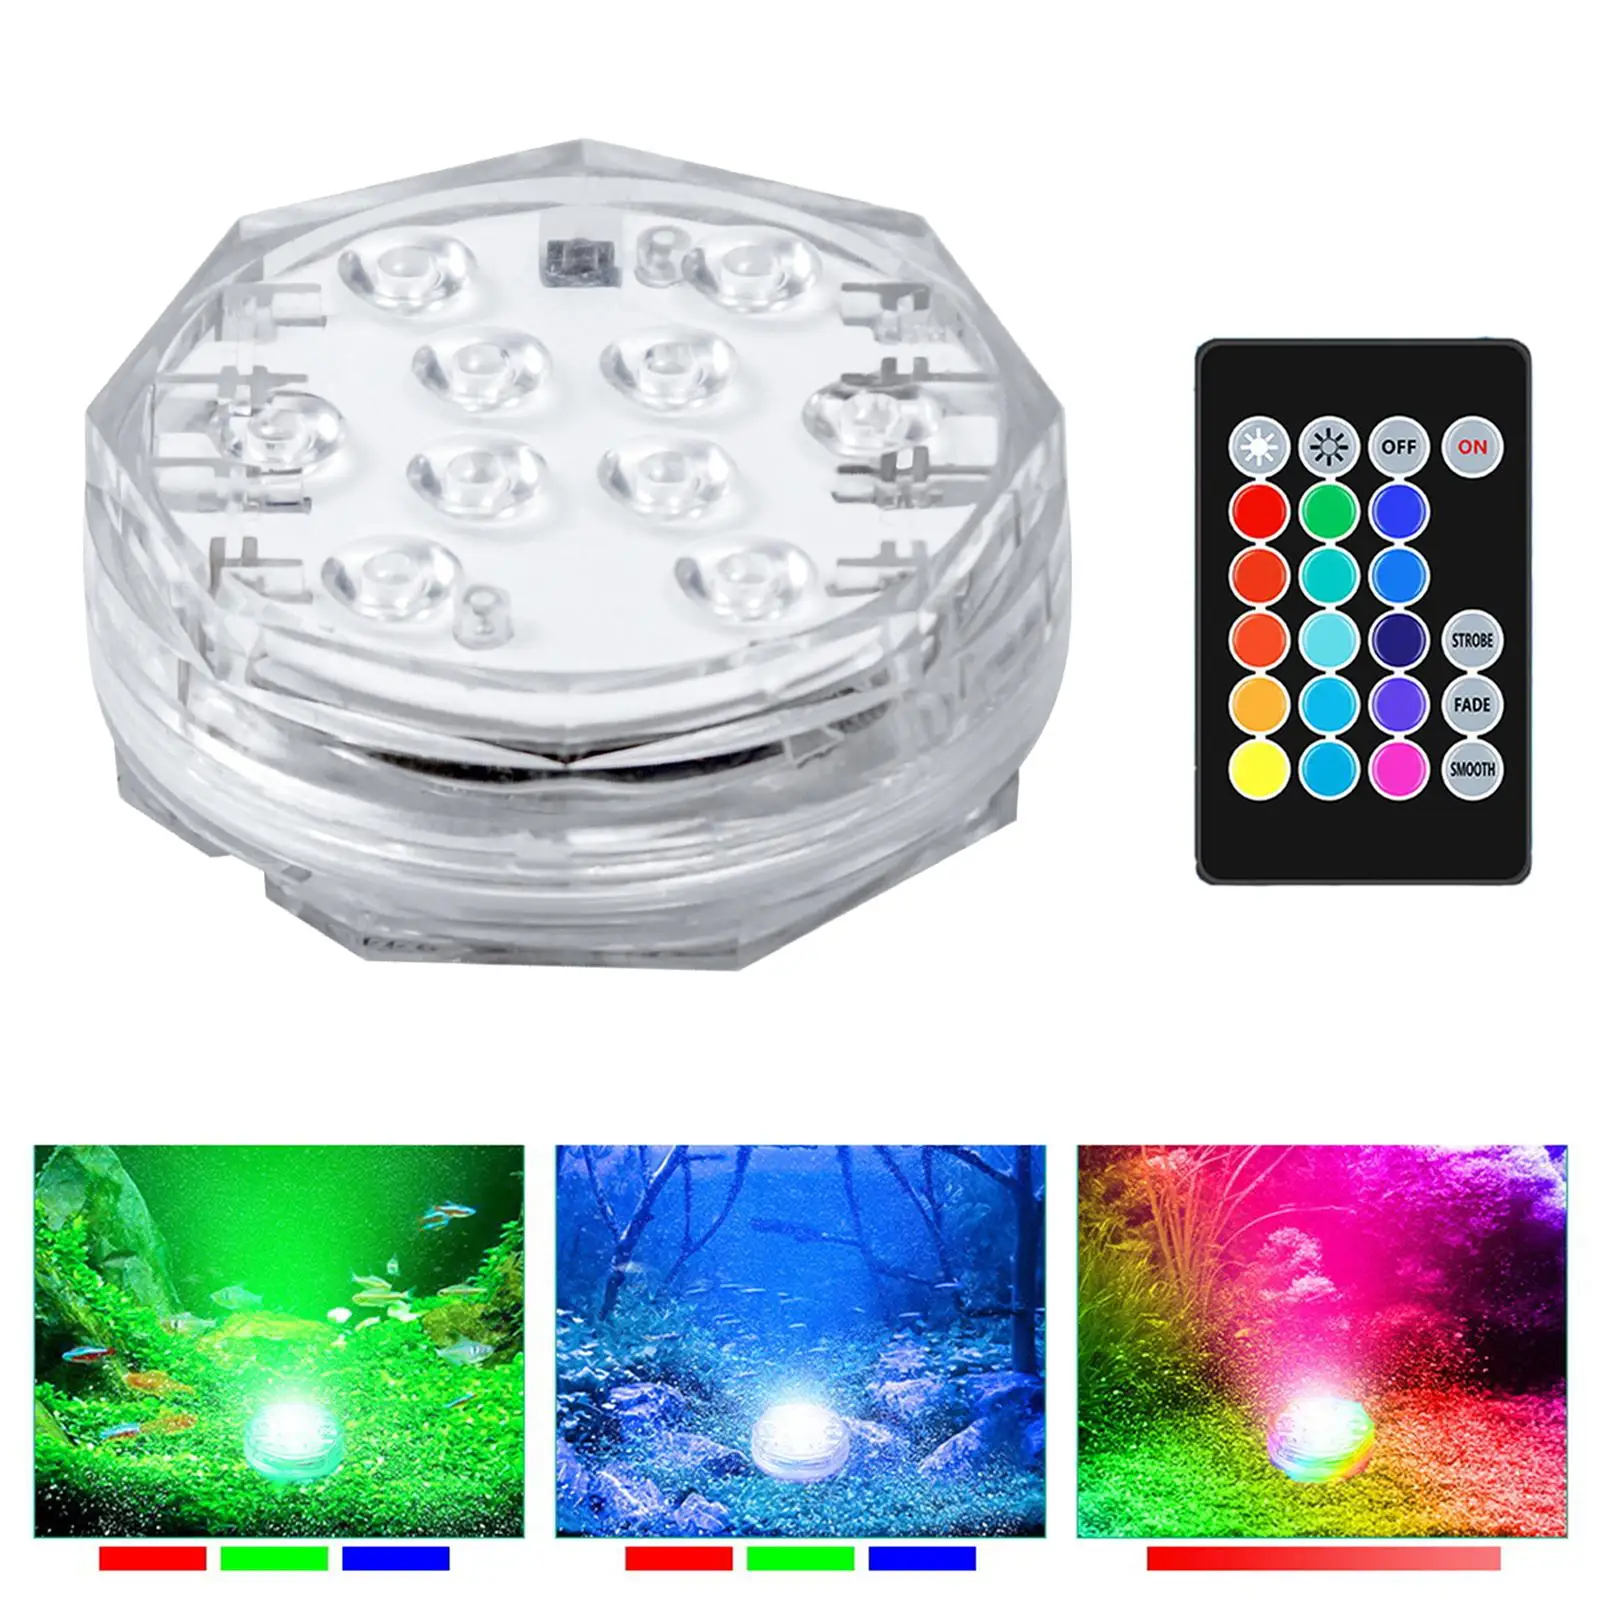 Waterproof Submersible LED Light 15 Colors Underwater Lamp Pool Light for Christmas Wedding Party Summer Beach Decoration